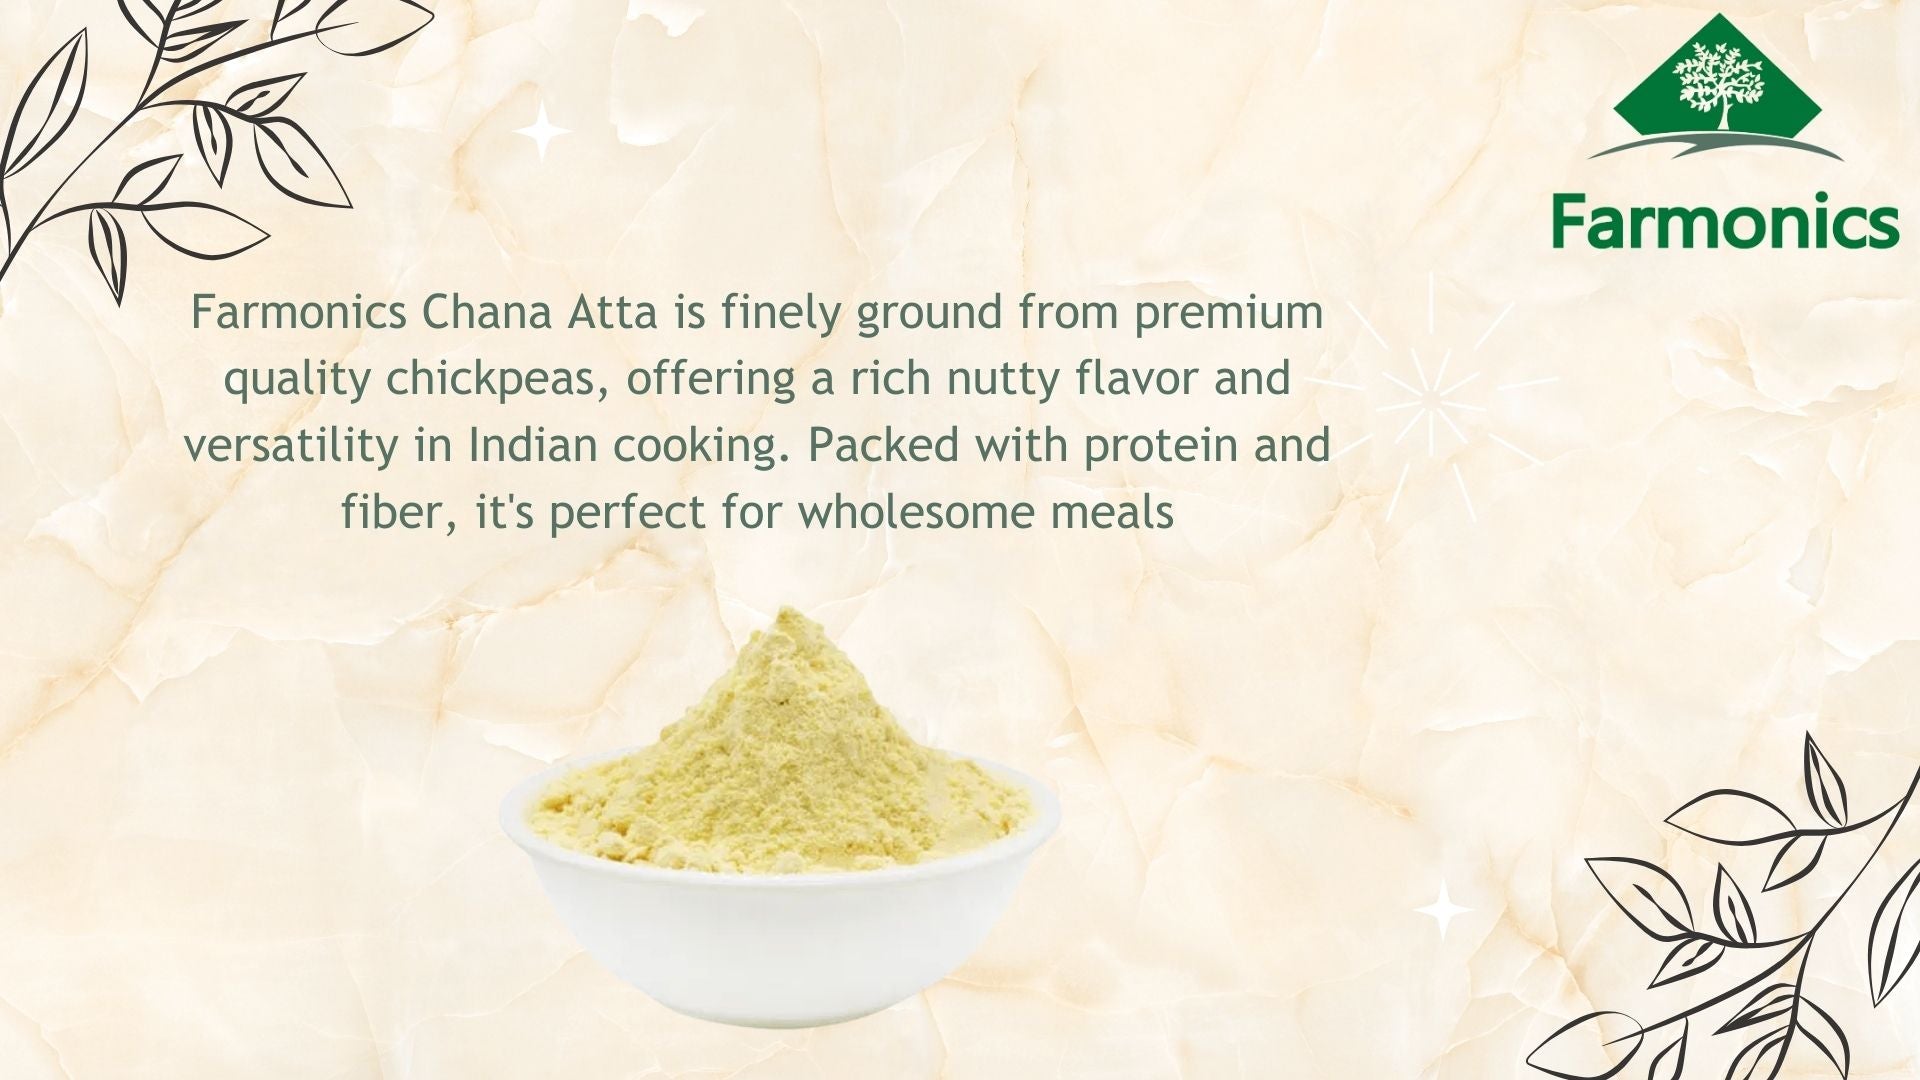 Here are some of the information about chana atta unadultered